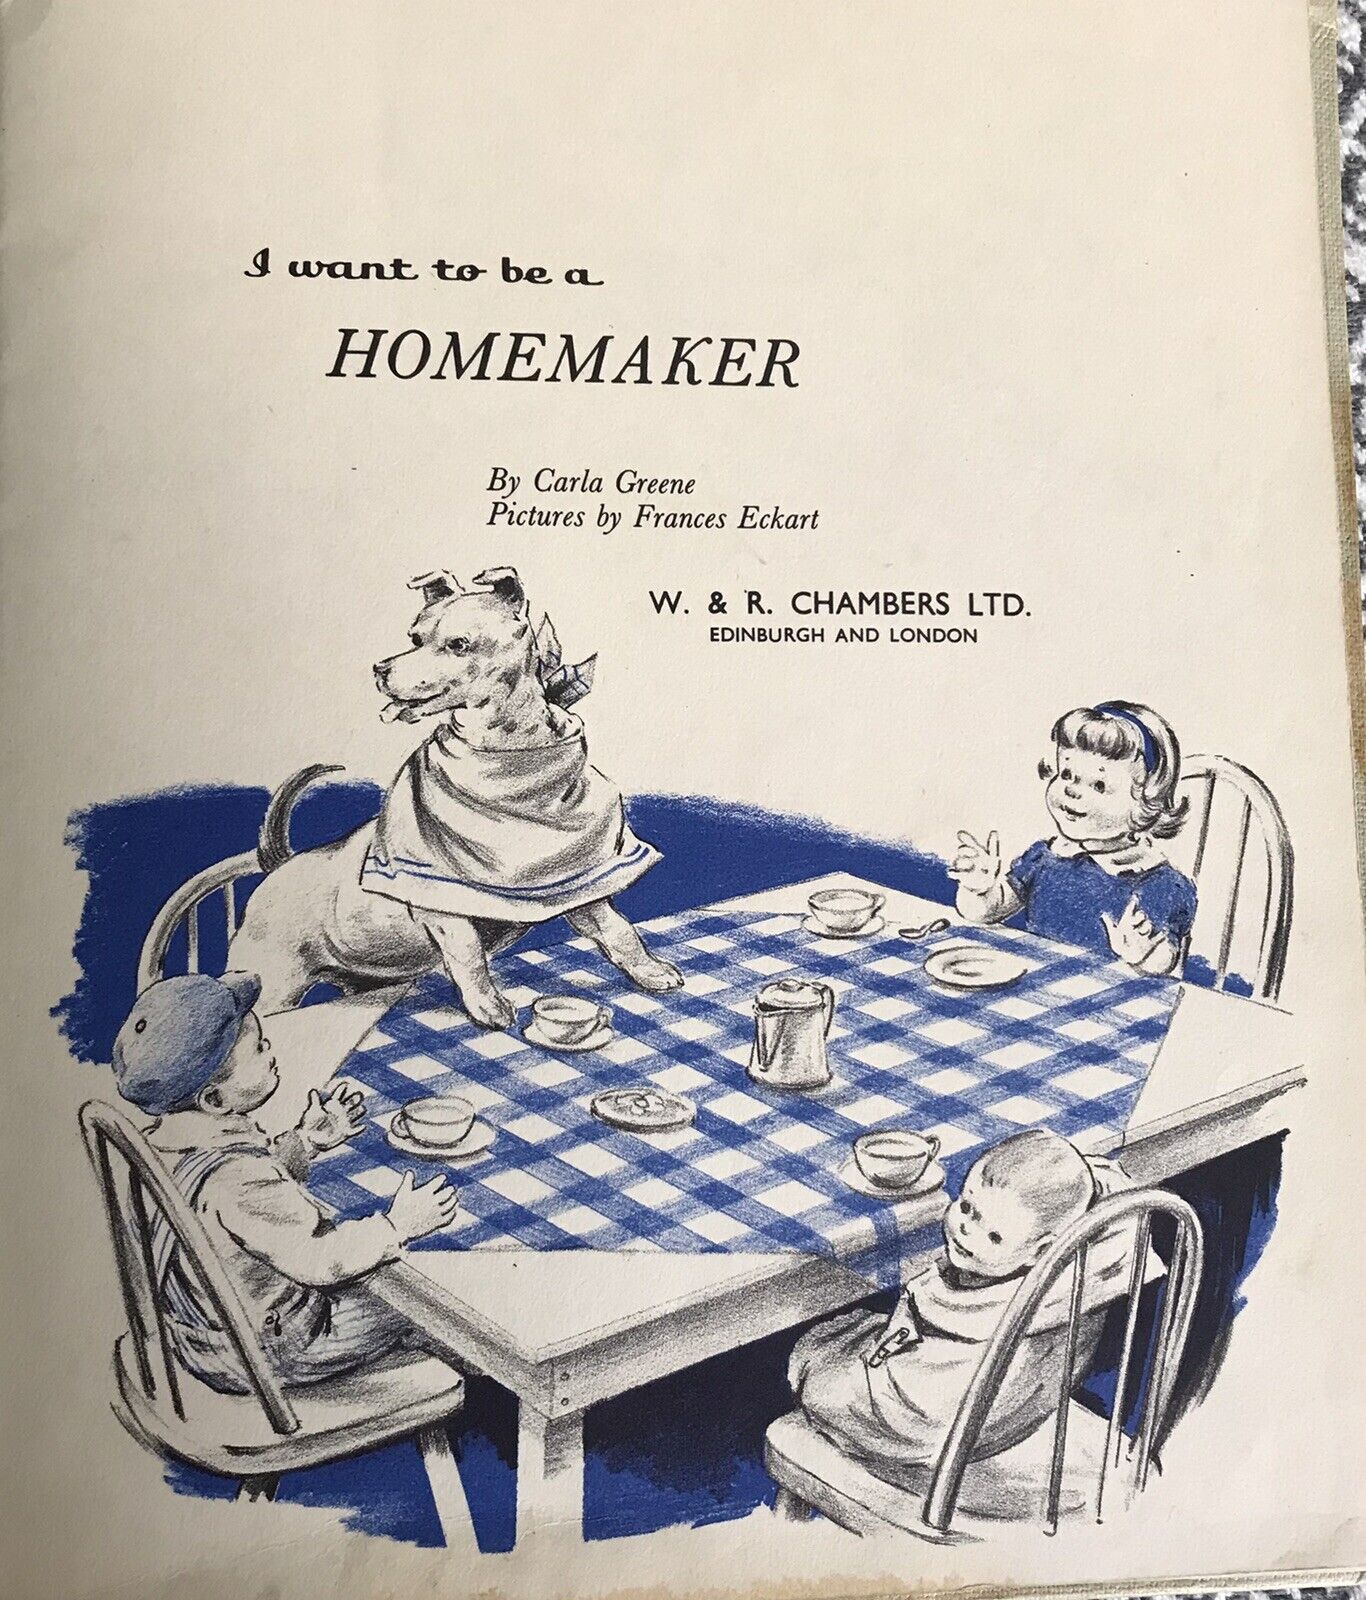 1965 I Want To Be A Homemaker - Carla Greene(Frances Eckart images) W&R Chambers